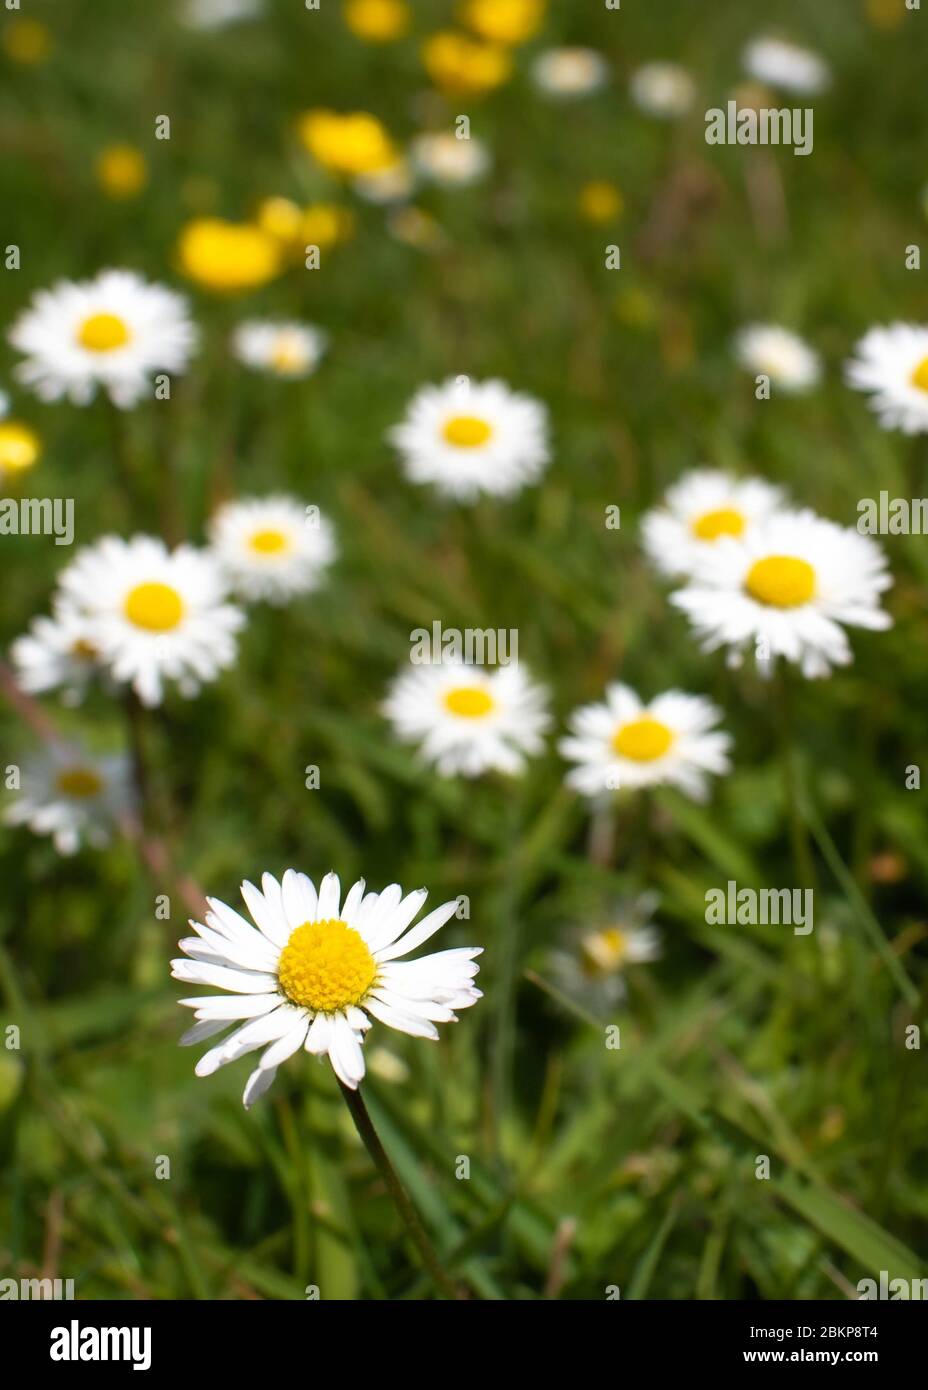 Close up image of daisies in grass in England - May 2020 - during coronavirus lockdown Stock Photo